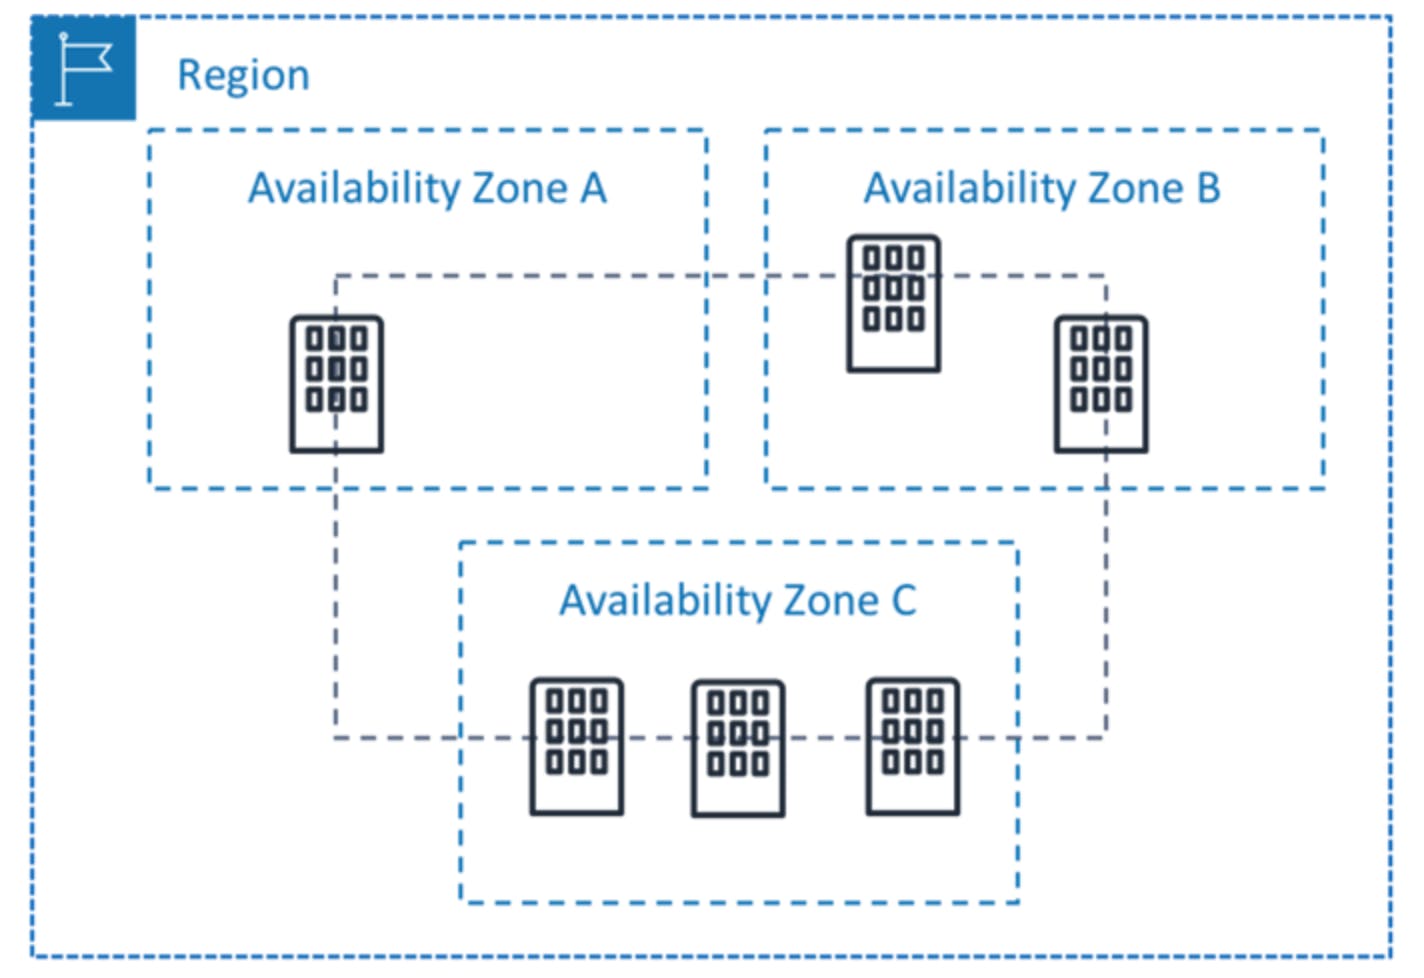 Image depicting how an AZ can be set up with 1 or multiple Data centres in Availability Zone